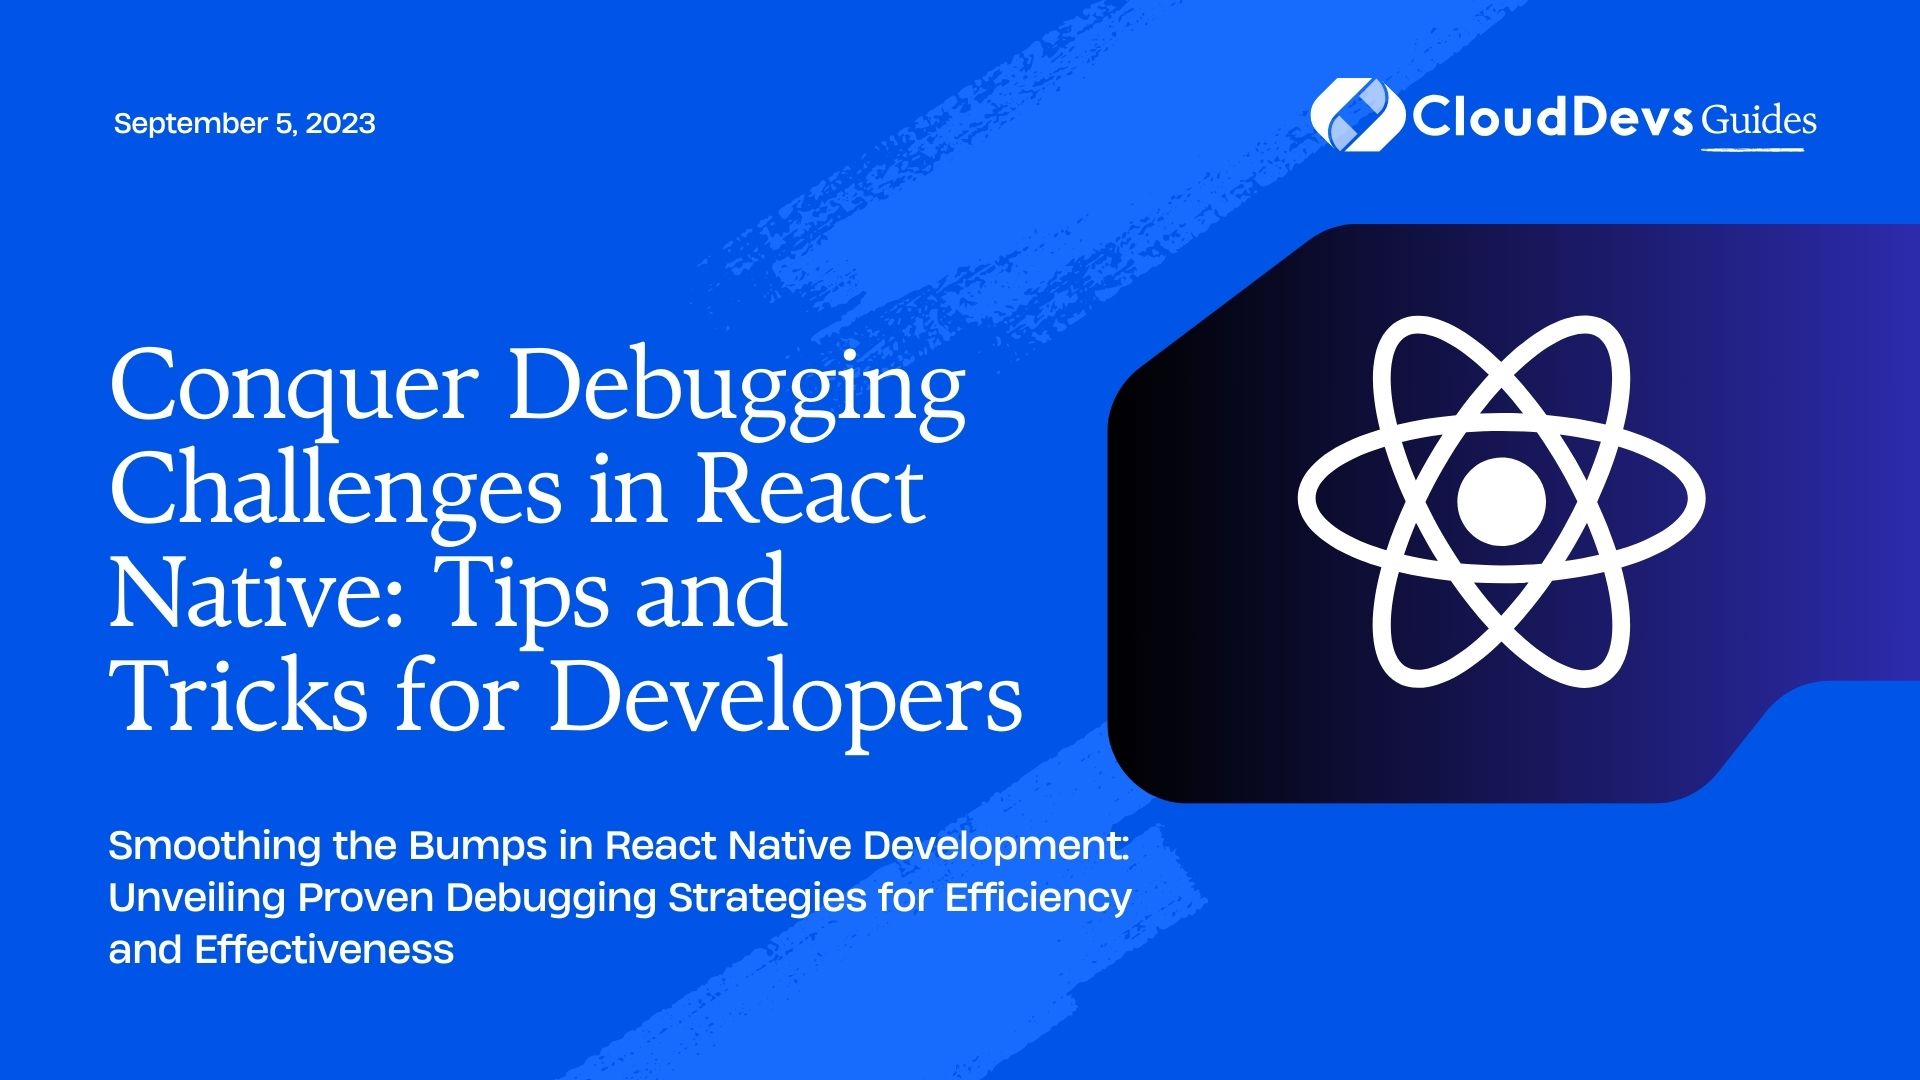 Conquer Debugging Challenges in React Native: Tips and Tricks for Developers